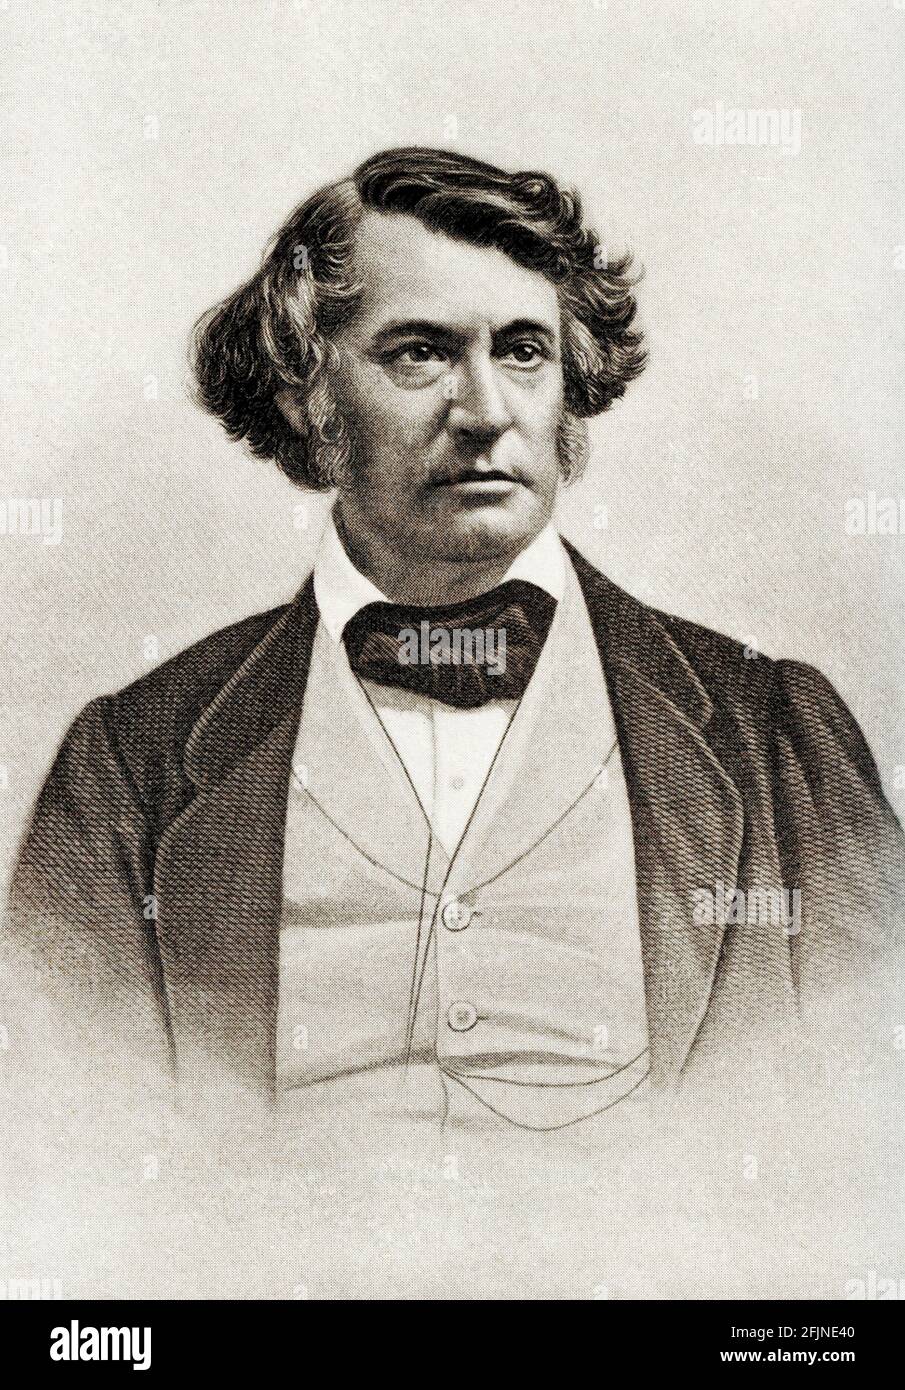 Charles Sumner (1811 –1874) was an American statesman and United States Senator from Massachusetts. As an academic lawyer and a powerful orator, Sumner was the leader of the anti-slavery forces in the state and a leader of the Radical Republicans in the U.S. Senate during the American Civil War. Stock Photo